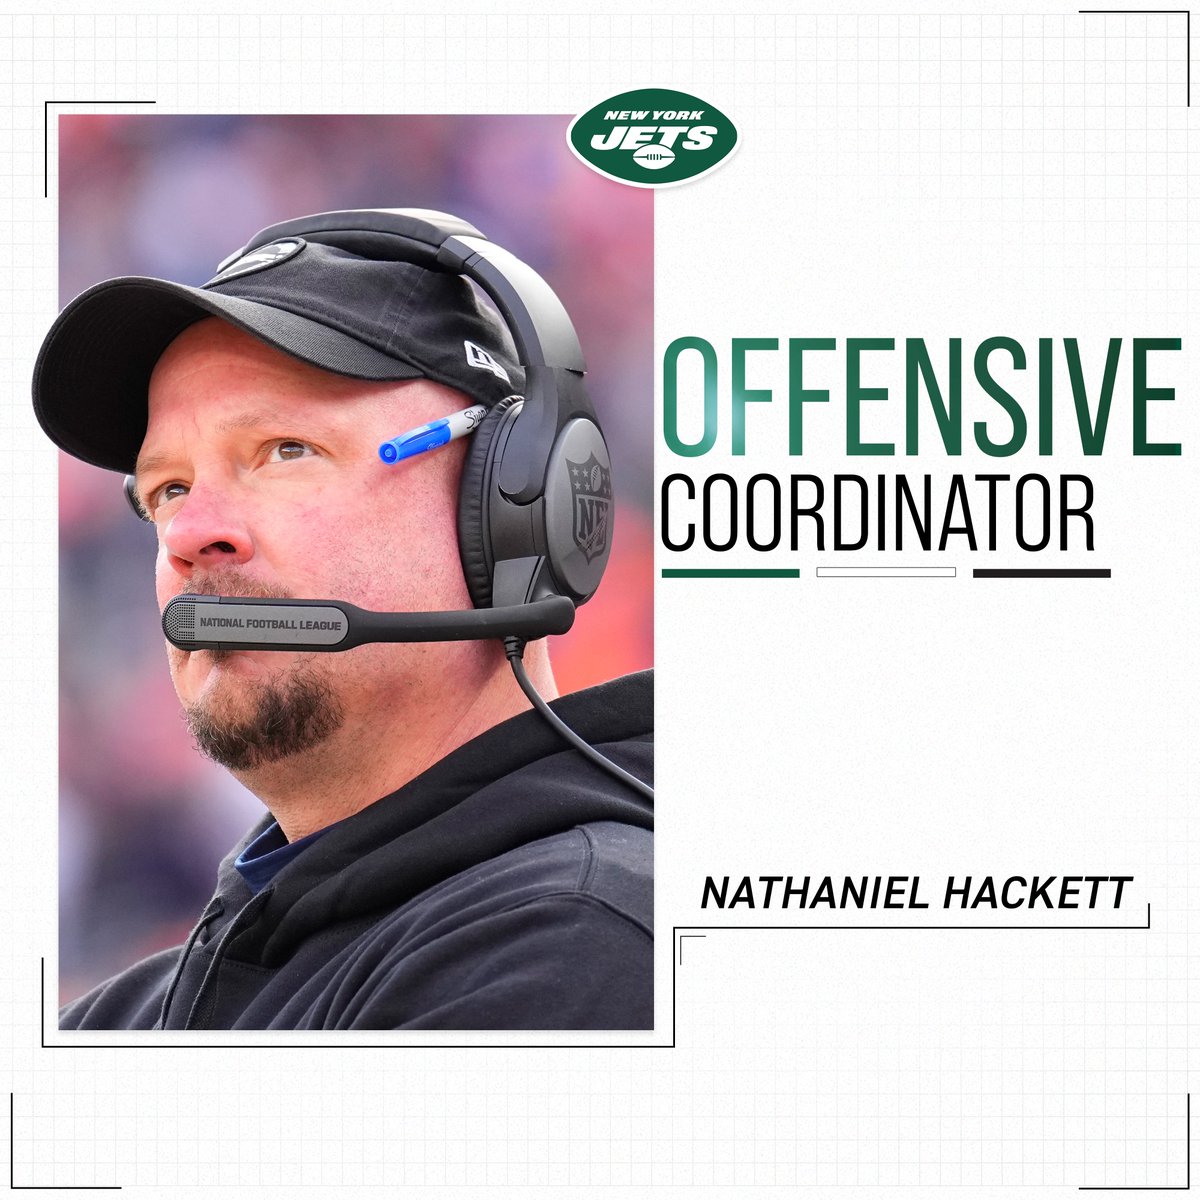 We've hired Nathaniel Hackett as our offensive coordinator.

📰 nyj.social/3XF0IVb